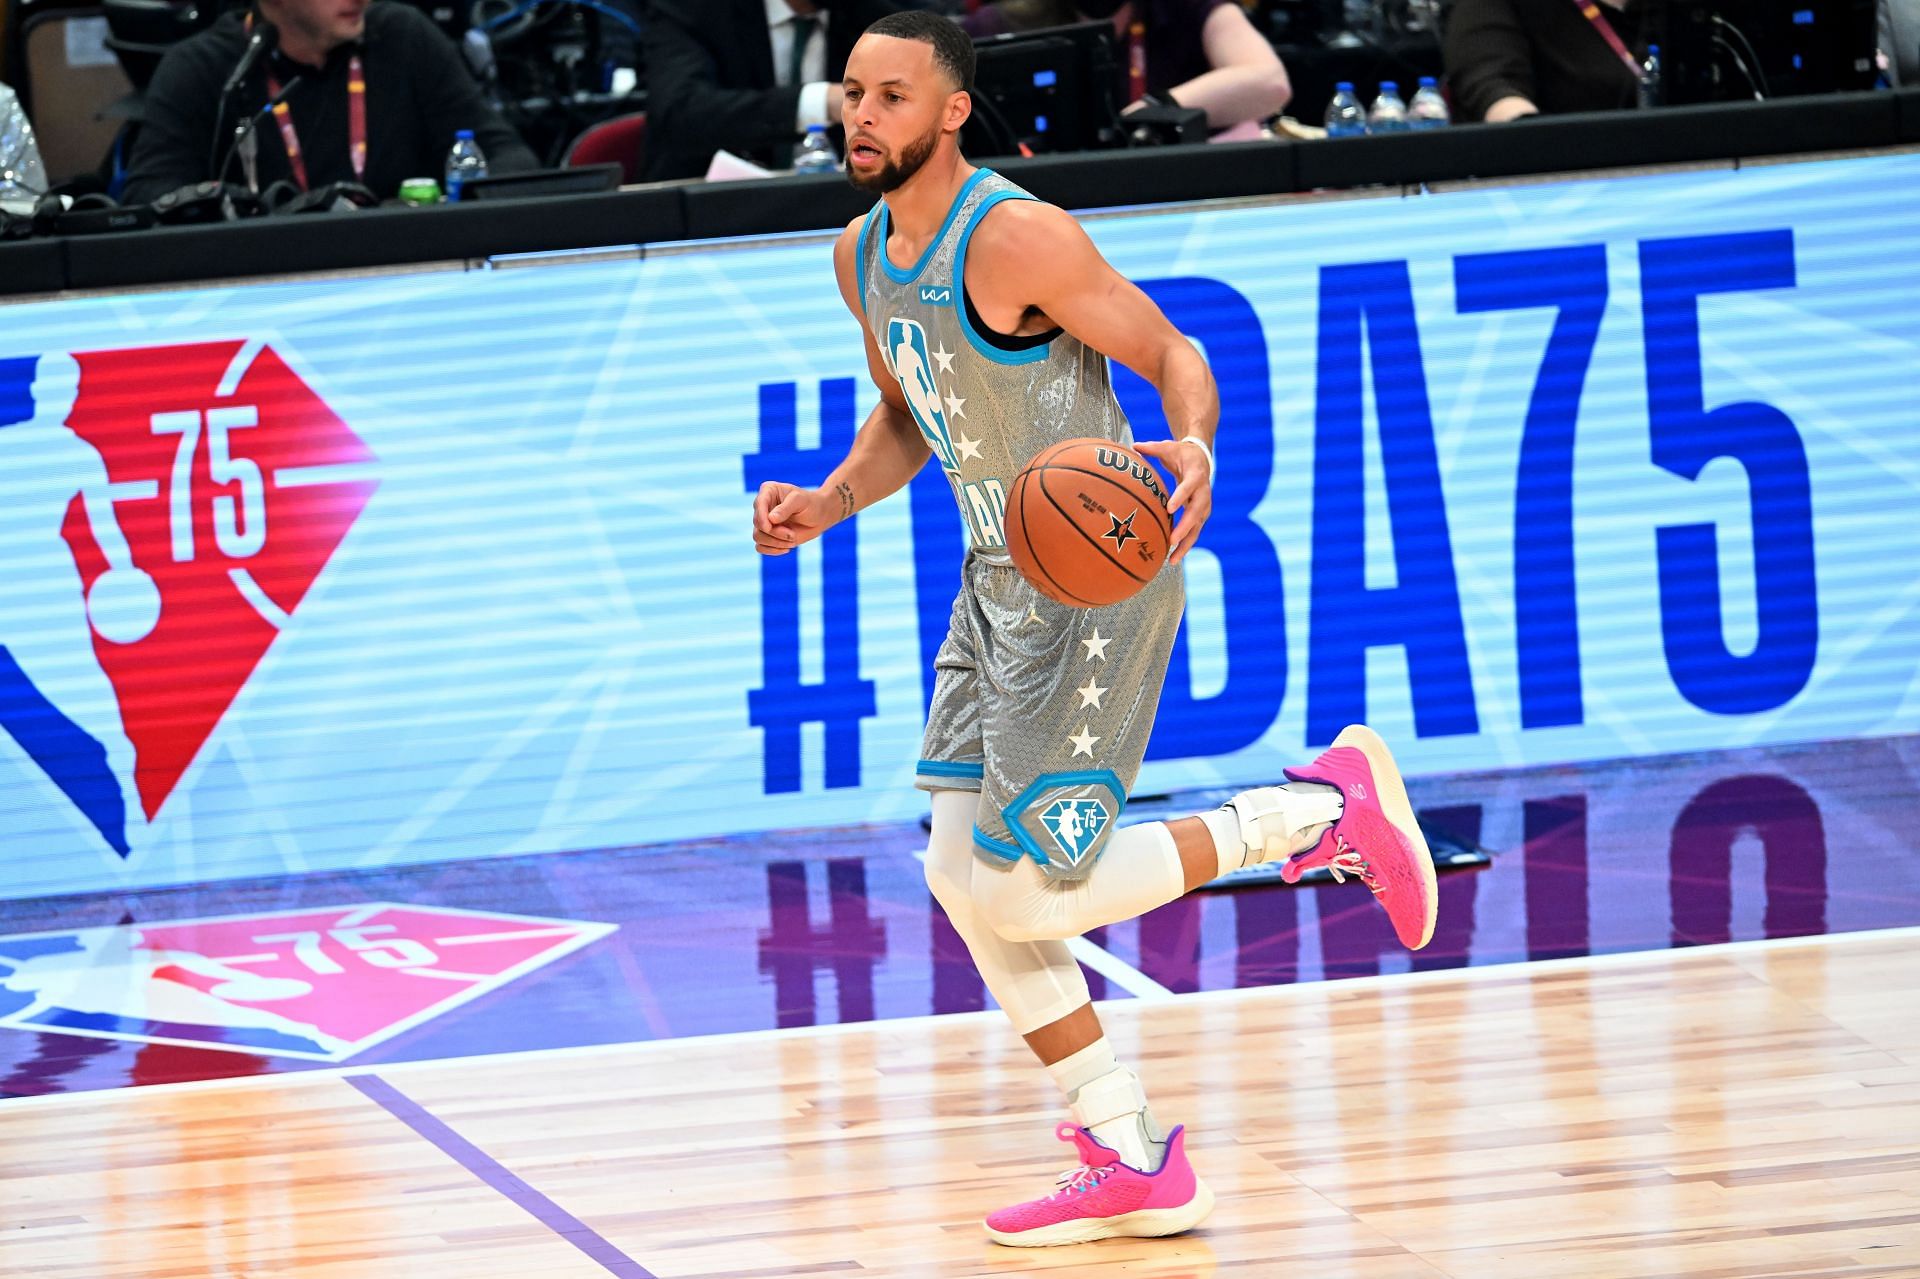 Steph Curry during the 2022 NBA All-Star Game